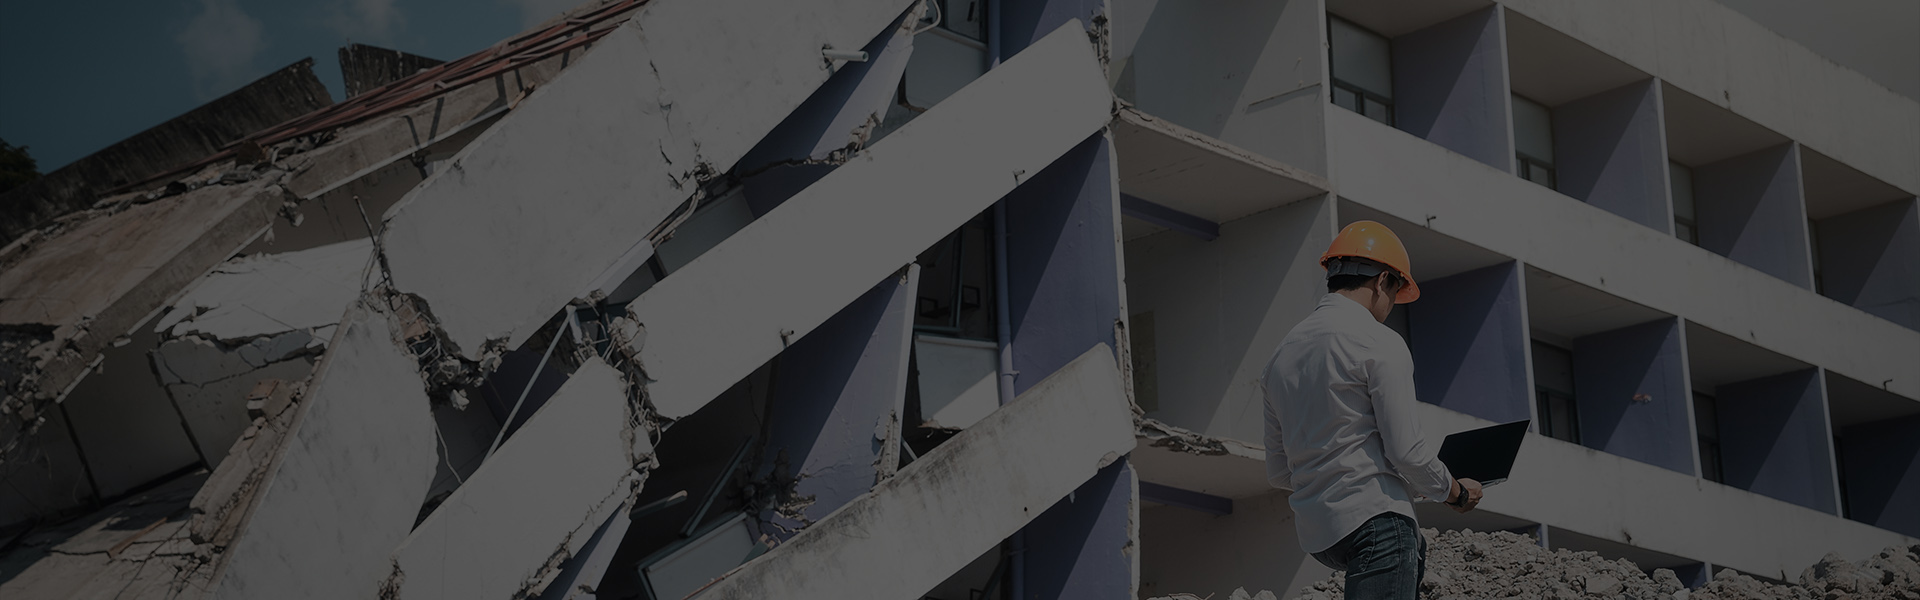 buildingcollapse | Injury Law Partners - Personal Injury Lawyers